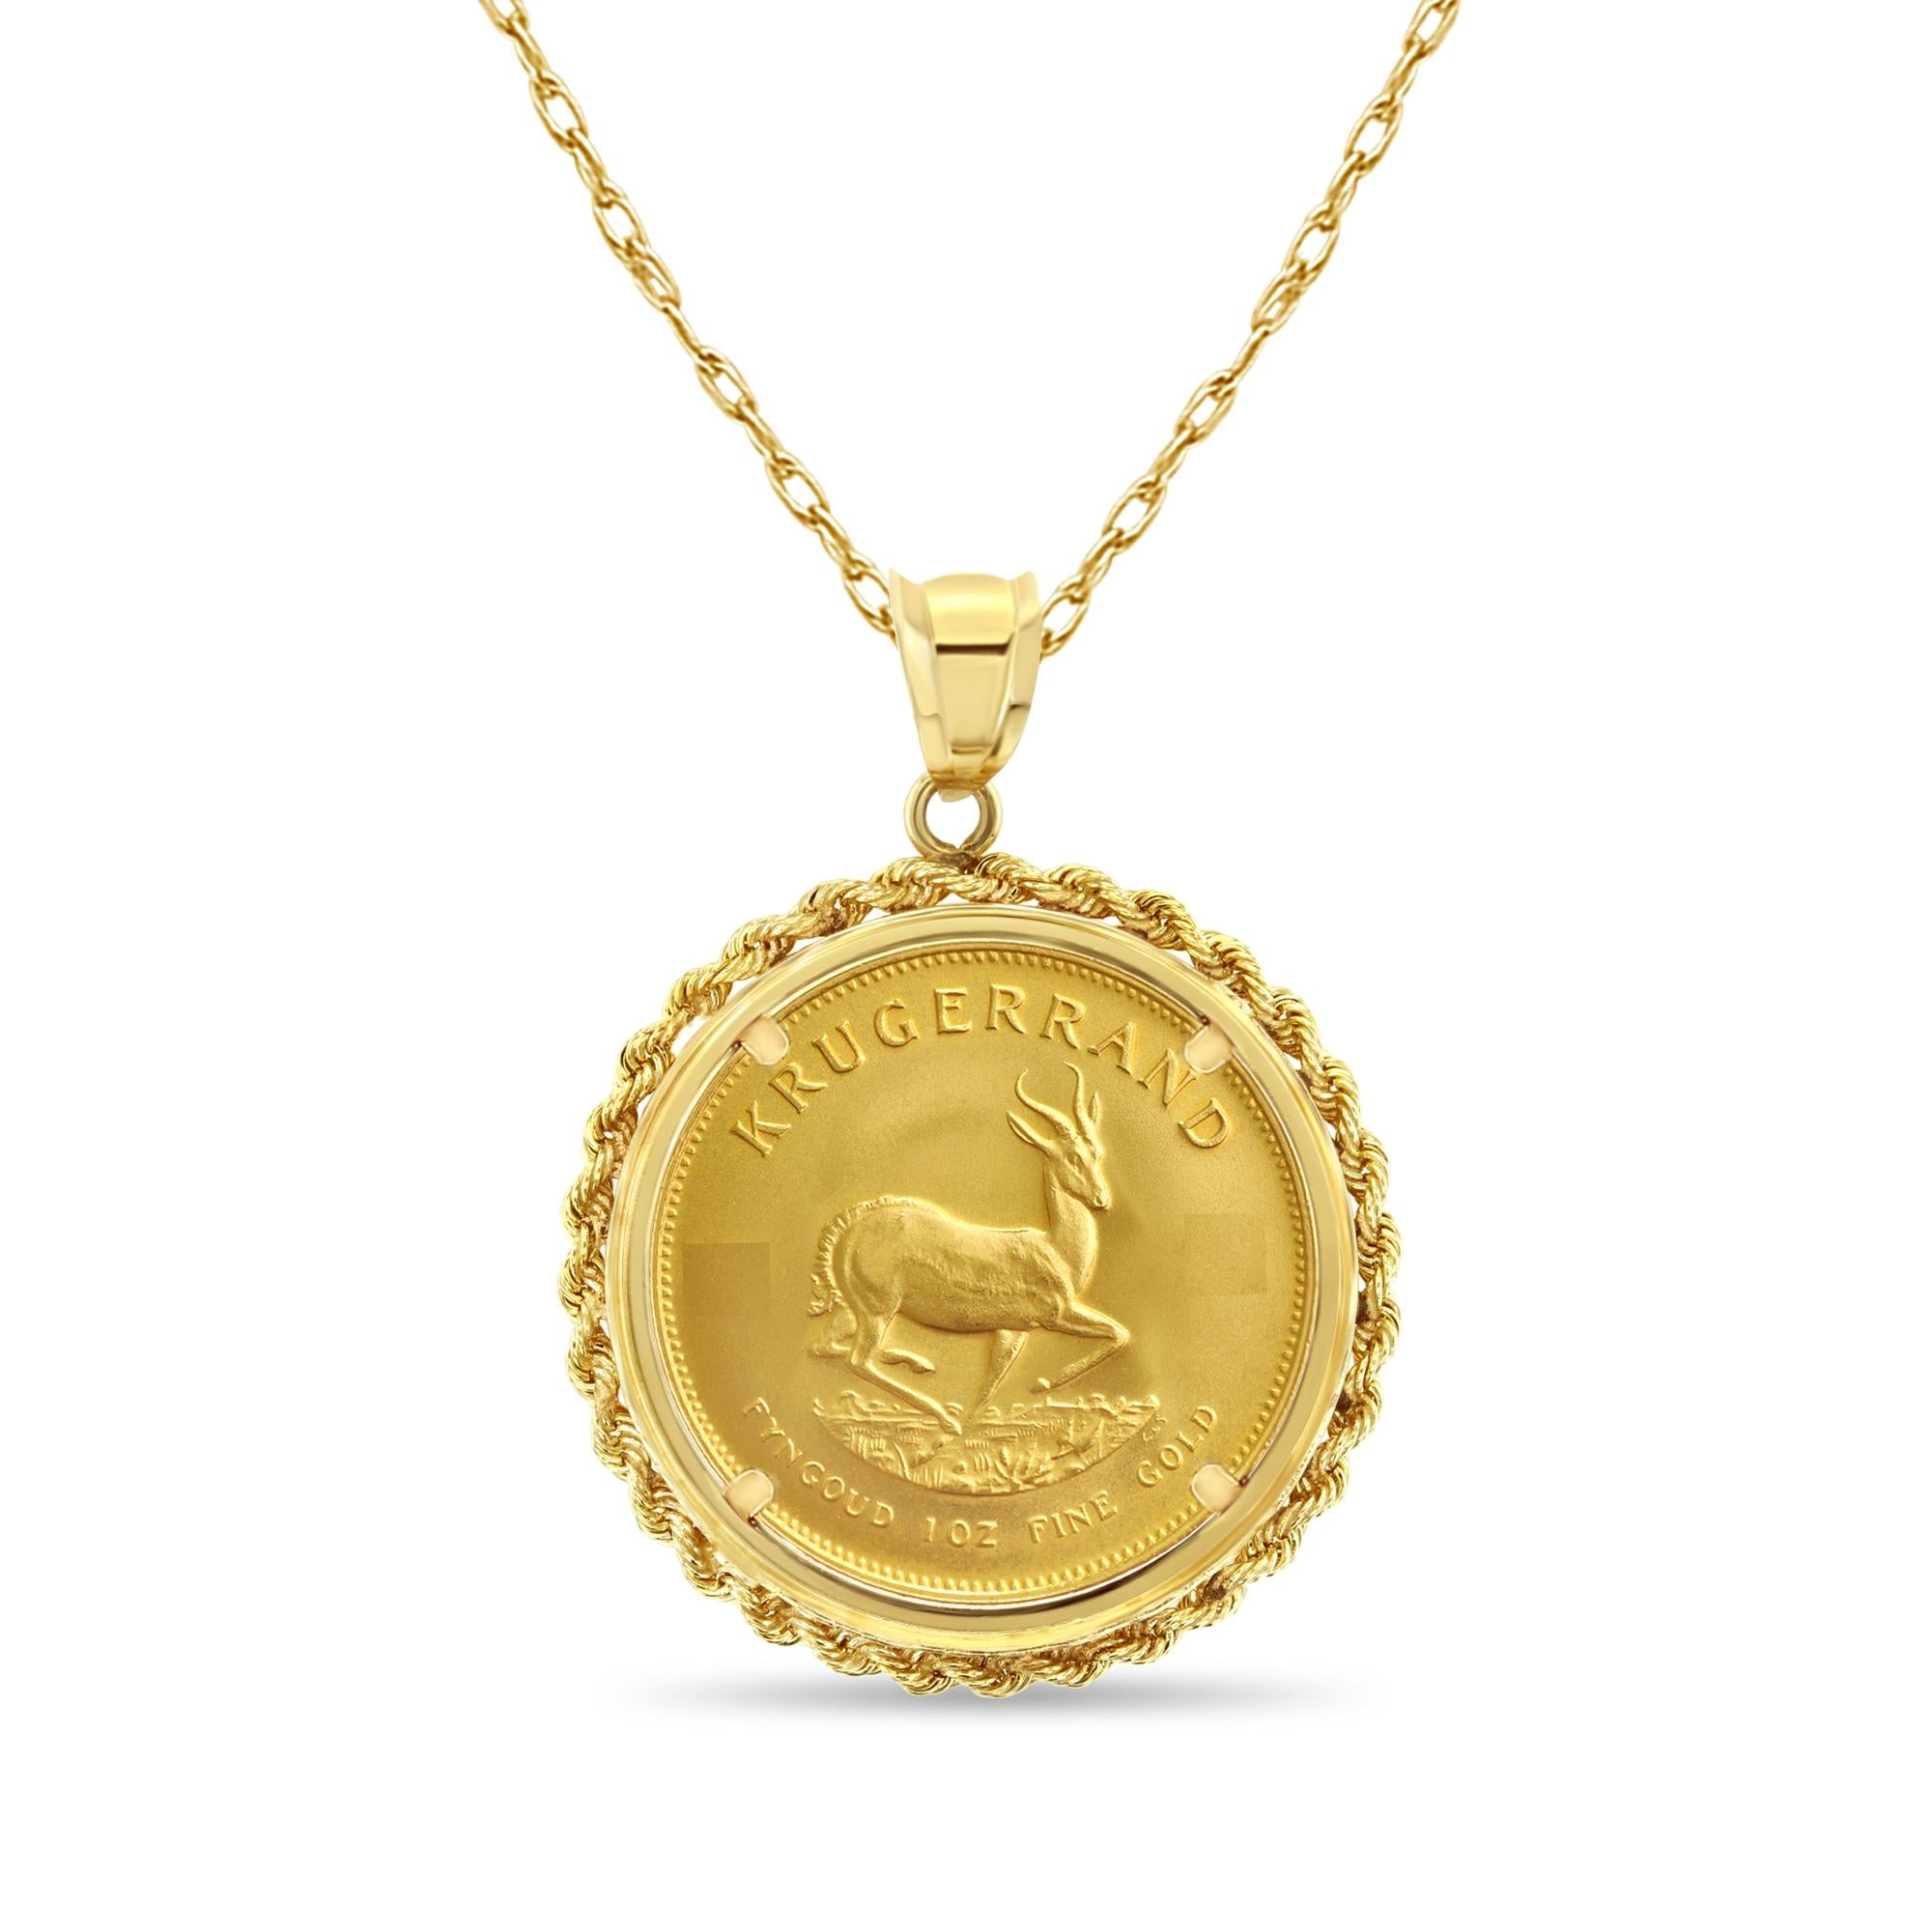 ✱ MADE TO ORDER  ✱

♥ Coin Information  ♥ 

Details: South African Krugerrand Gold Coin
Composition: .9167 Gold Ounce
Precious Metal Content: 1OZ
Year: Varies
Diameter: 33mm
Obverse: Paul Kruger
Reverse: Antelope

 ♥ Bezel Information  ♥ 

Style: